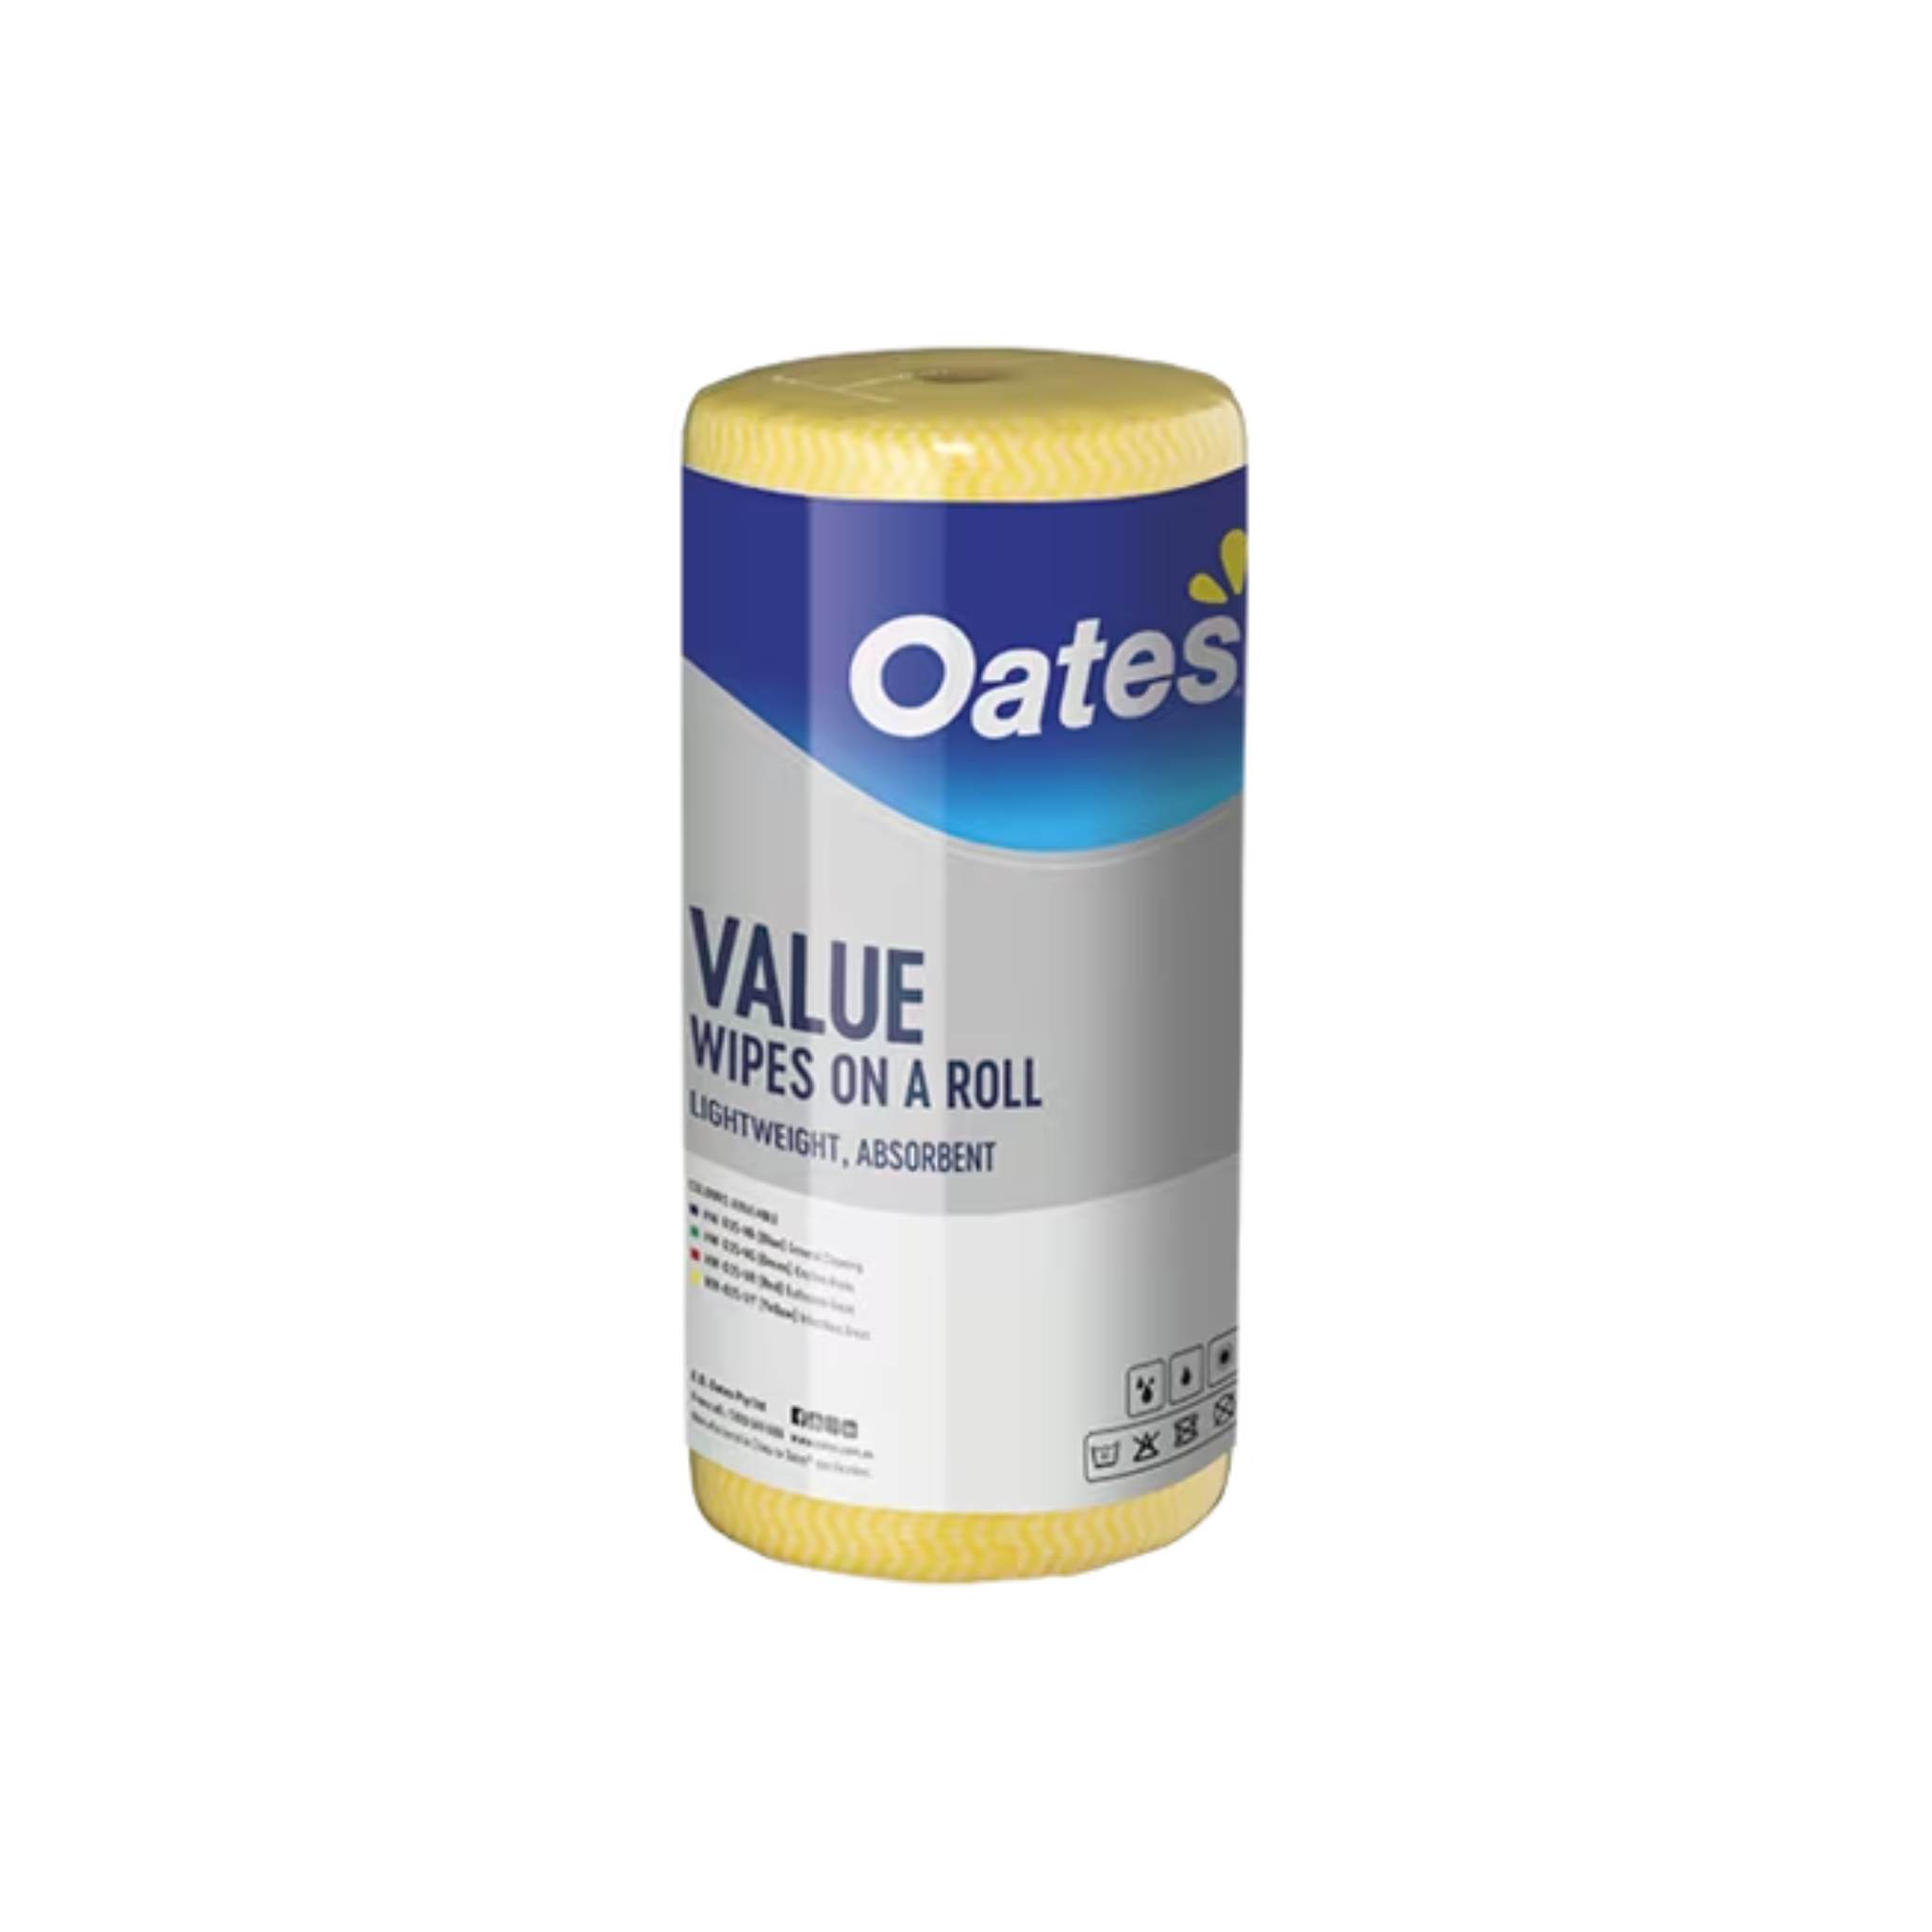 Oates Value Wipes Roll 45m - Yellow